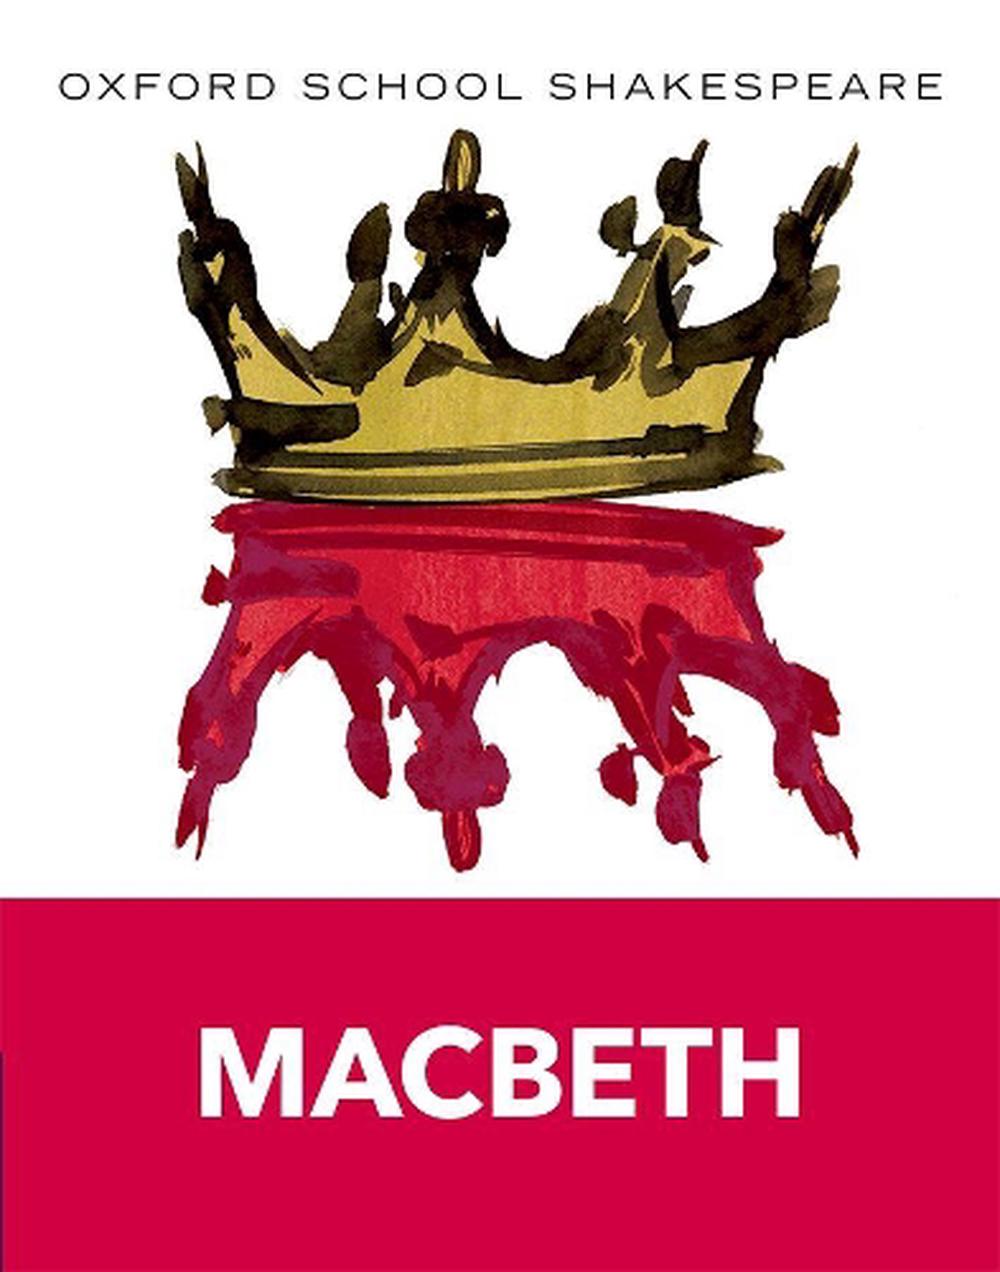 about macbeth by william shakespeare